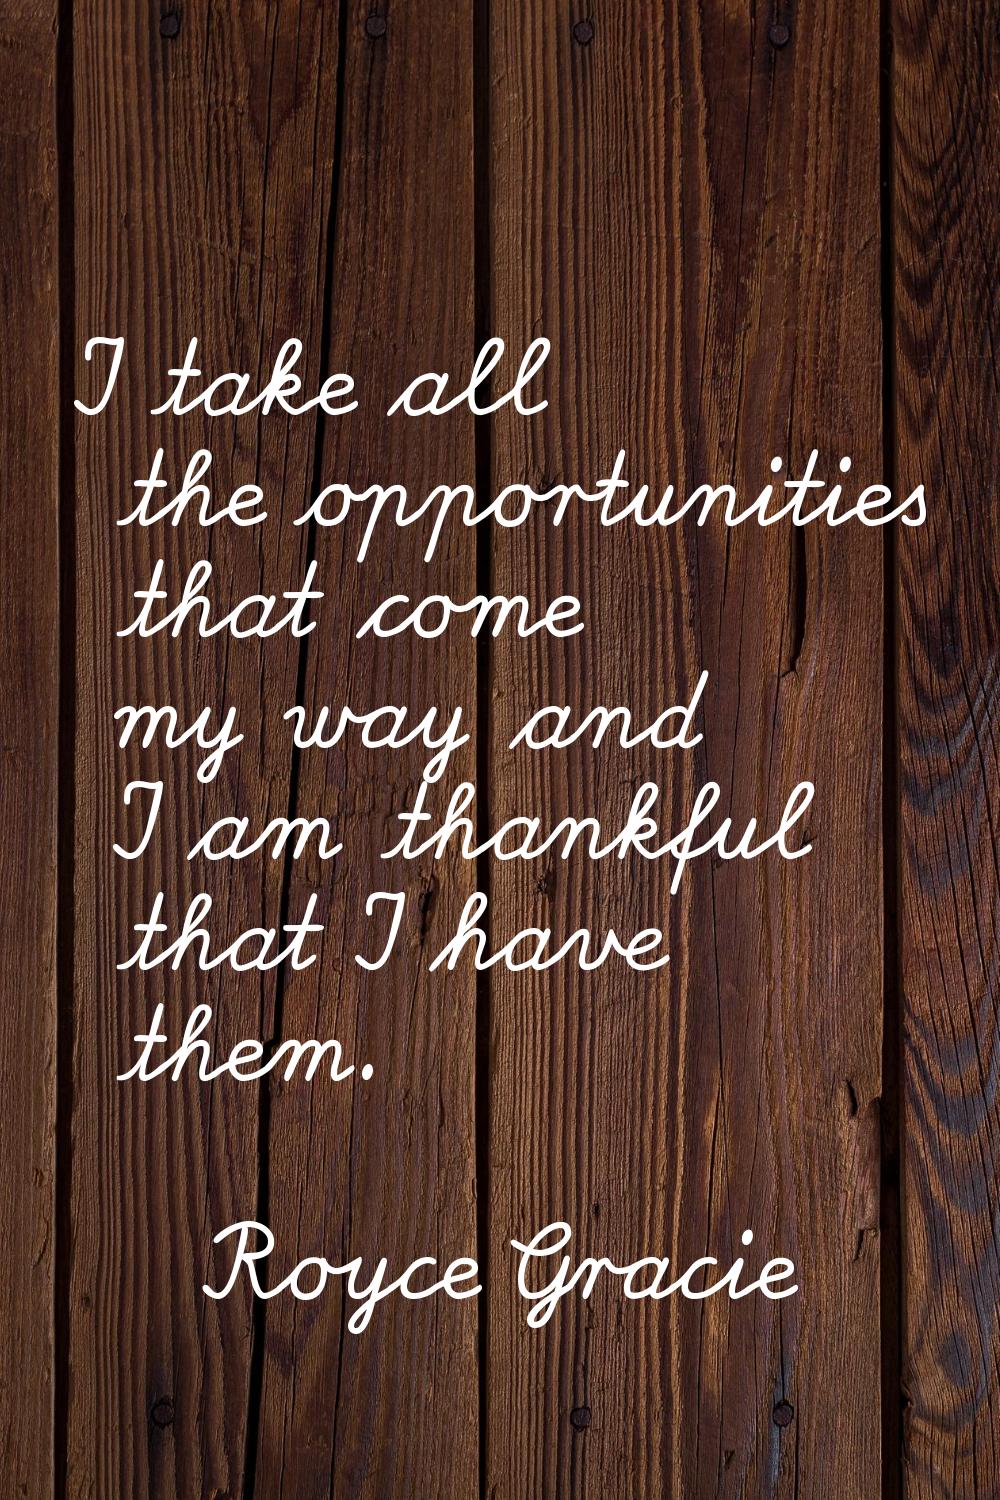 I take all the opportunities that come my way and I am thankful that I have them.